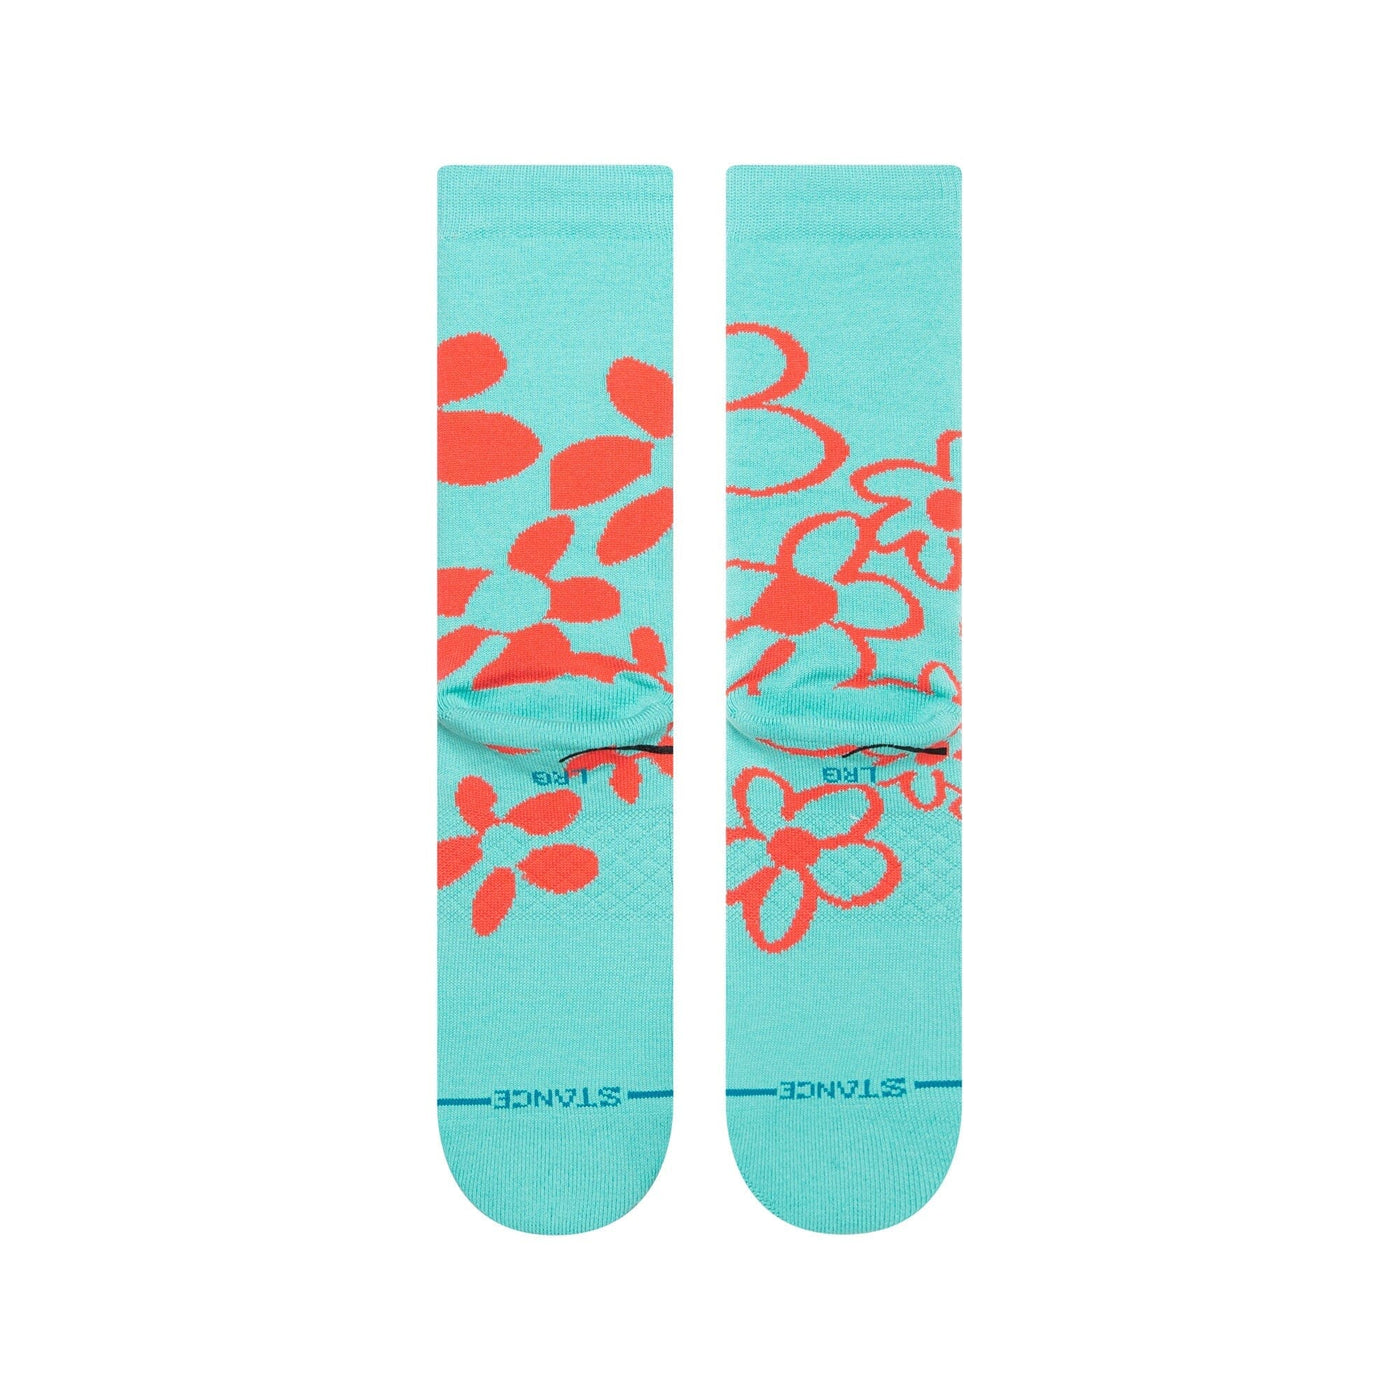 Surf Check By Russ Crew Socks | Women's - Knock Your Socks Off